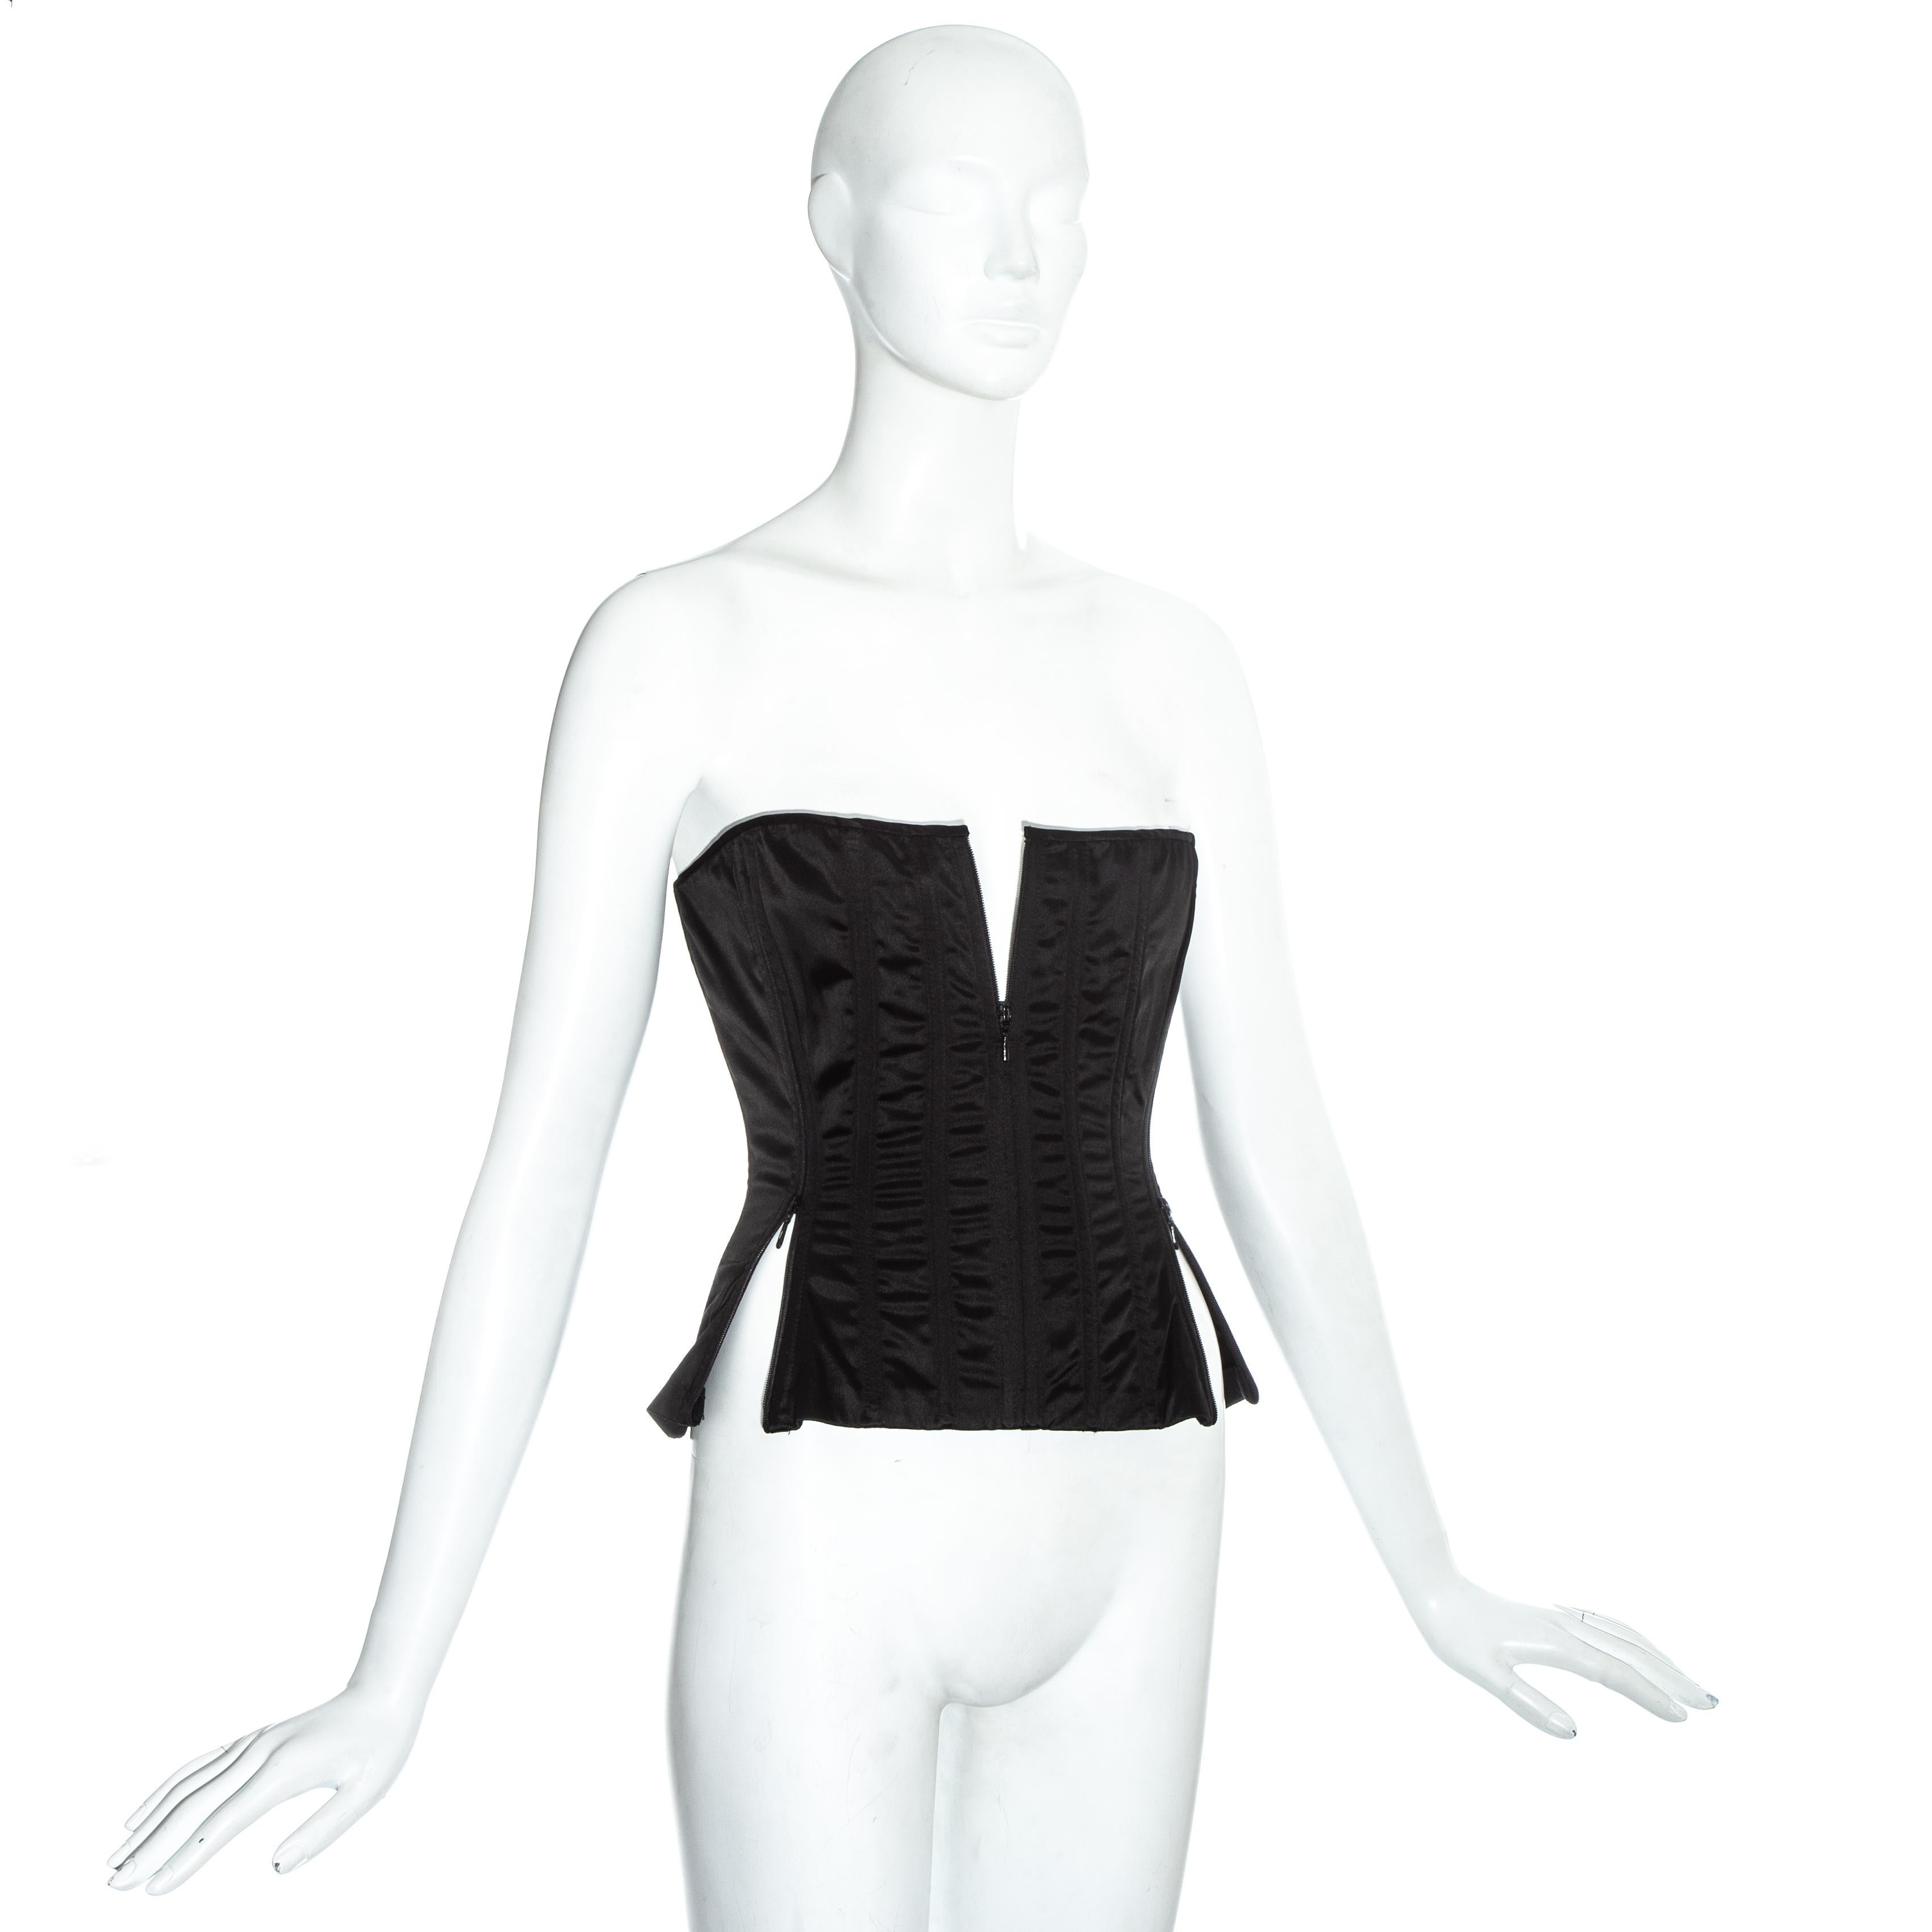 Dolce & Gabbana black satin lycra evening strapless corset with multiple zip fastenings allowing the wearer to style the corset in multiple ways. 

Spring-Summer 1999